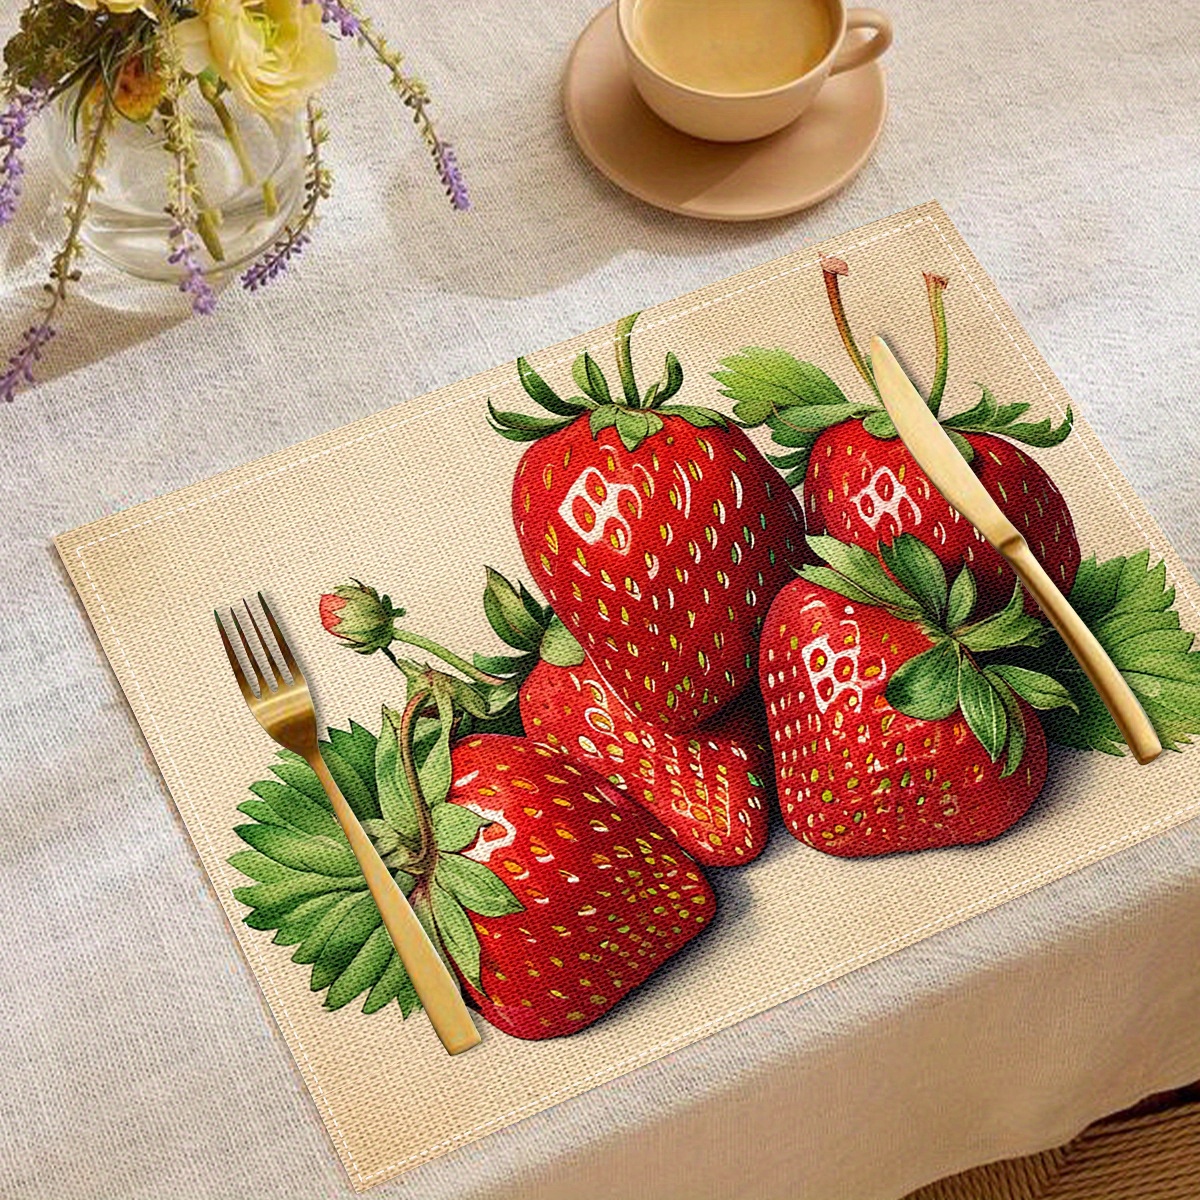 

4-piece Set Chic Strawberry Print Linen Placemats - Rectangular, Heat-resistant & Hand-washable Dining Mats For Everyday Elegance